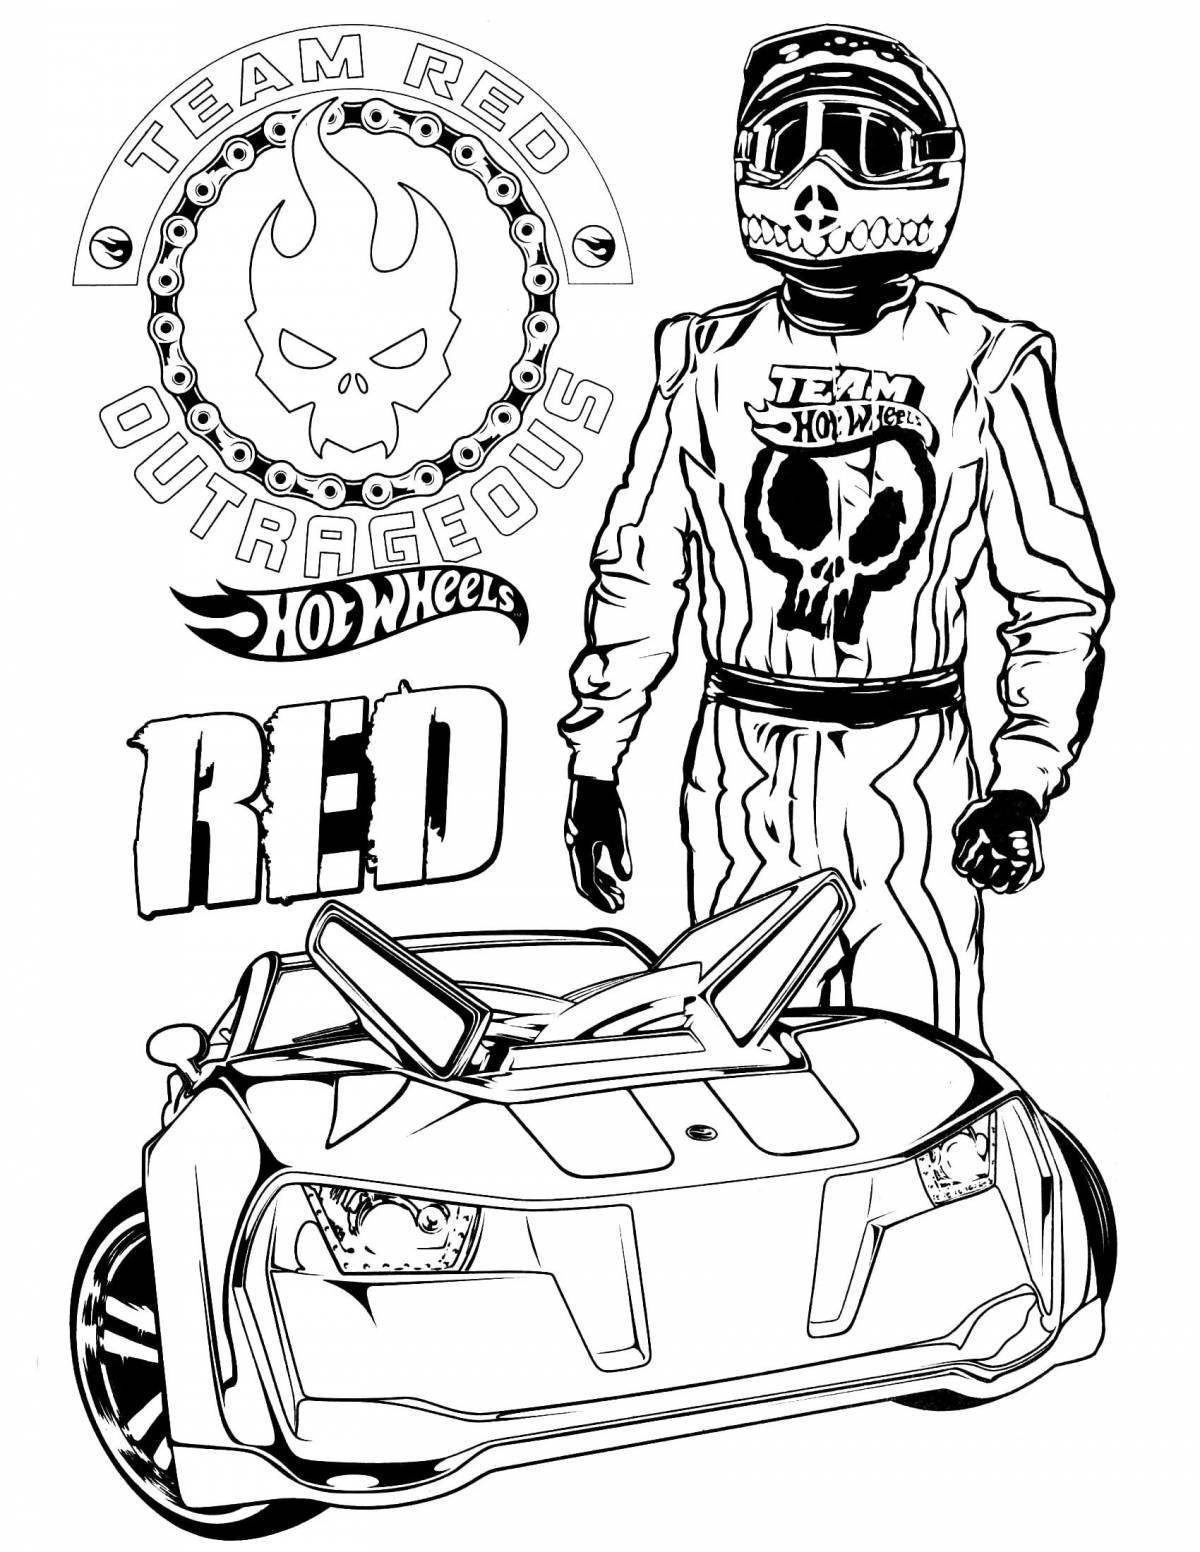 Exciting hot wheels motorcycle coloring page